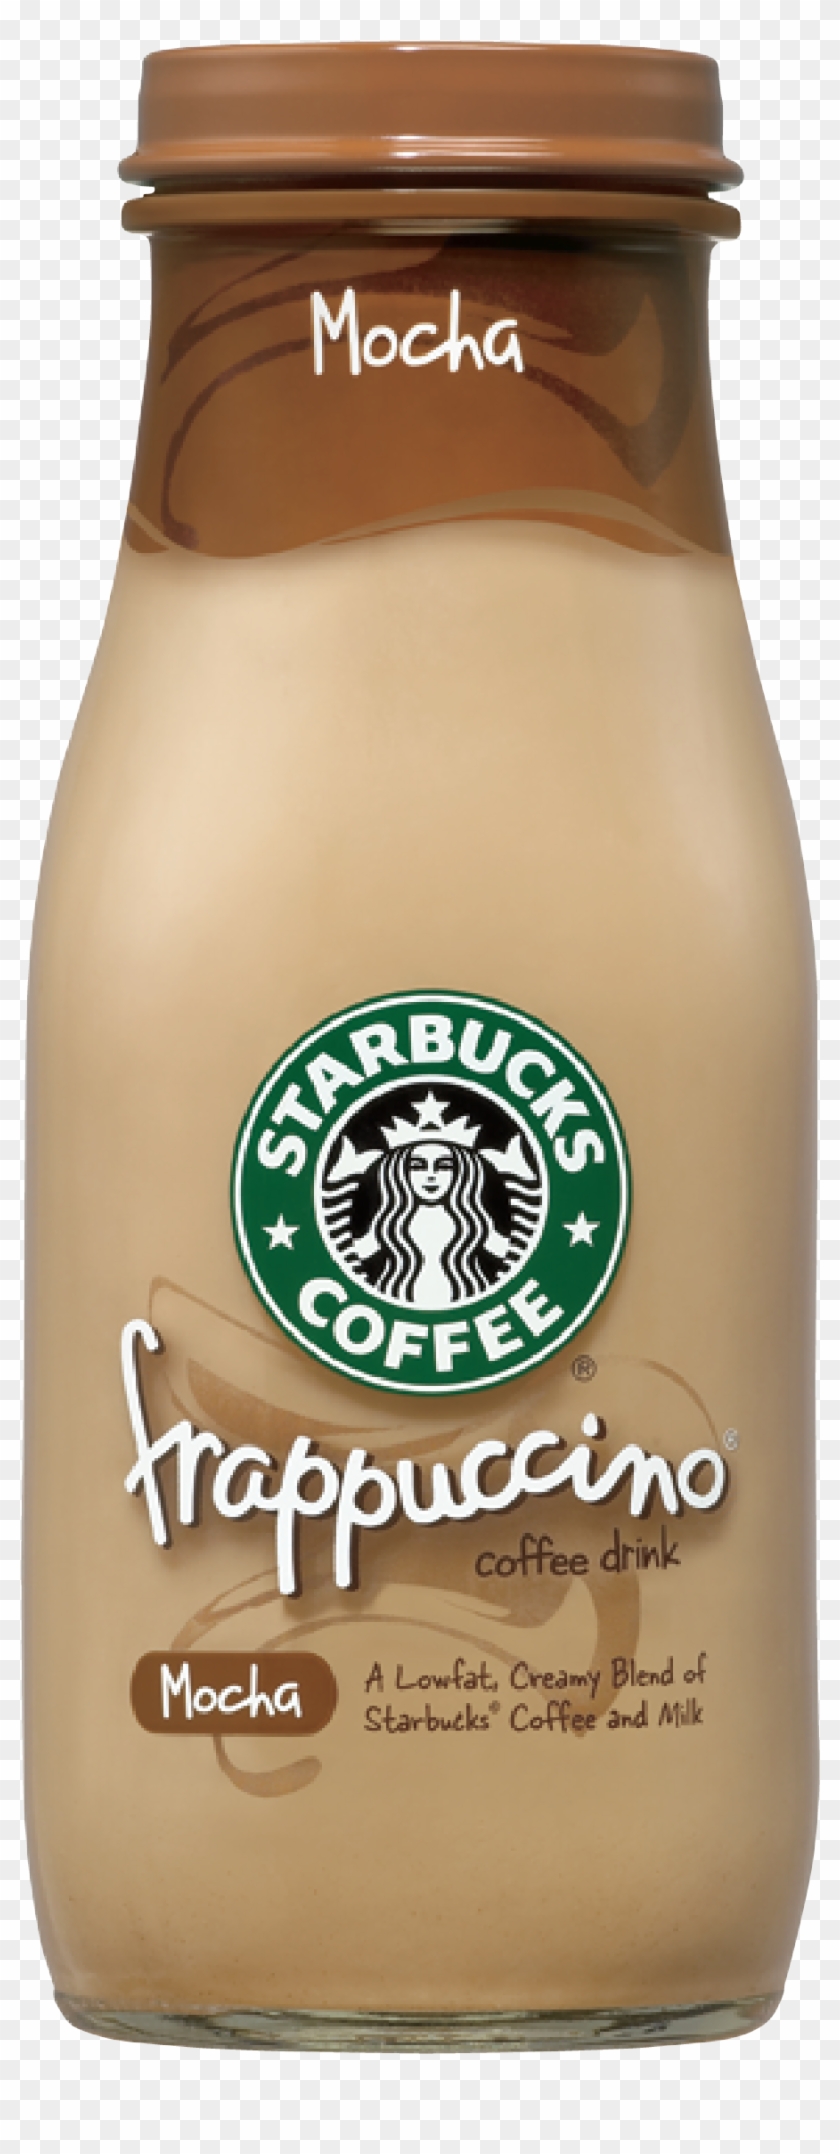 Starbucks Frappuccino Coffee Drink - Coffee Drink Package Png Clipart #2422492